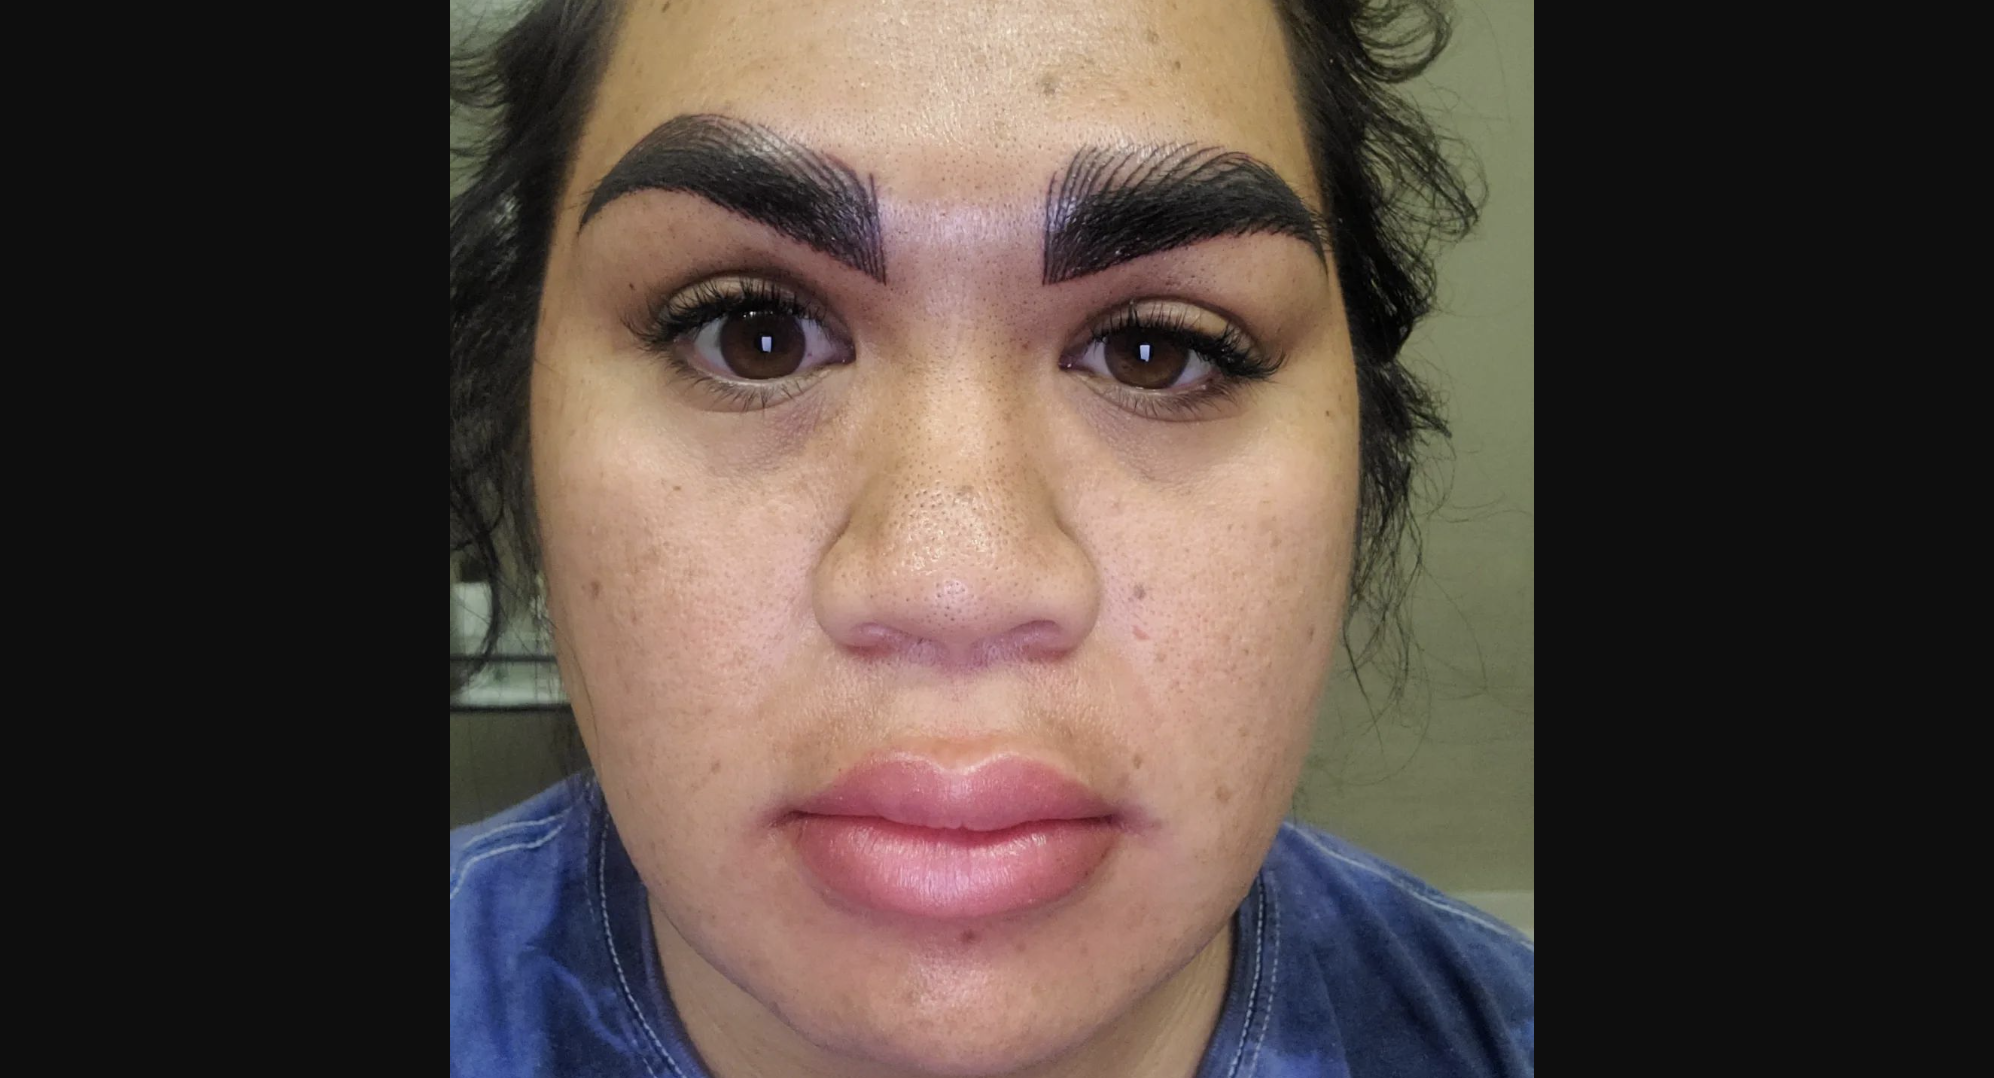 Texas woman speaks out on botched microblading experience